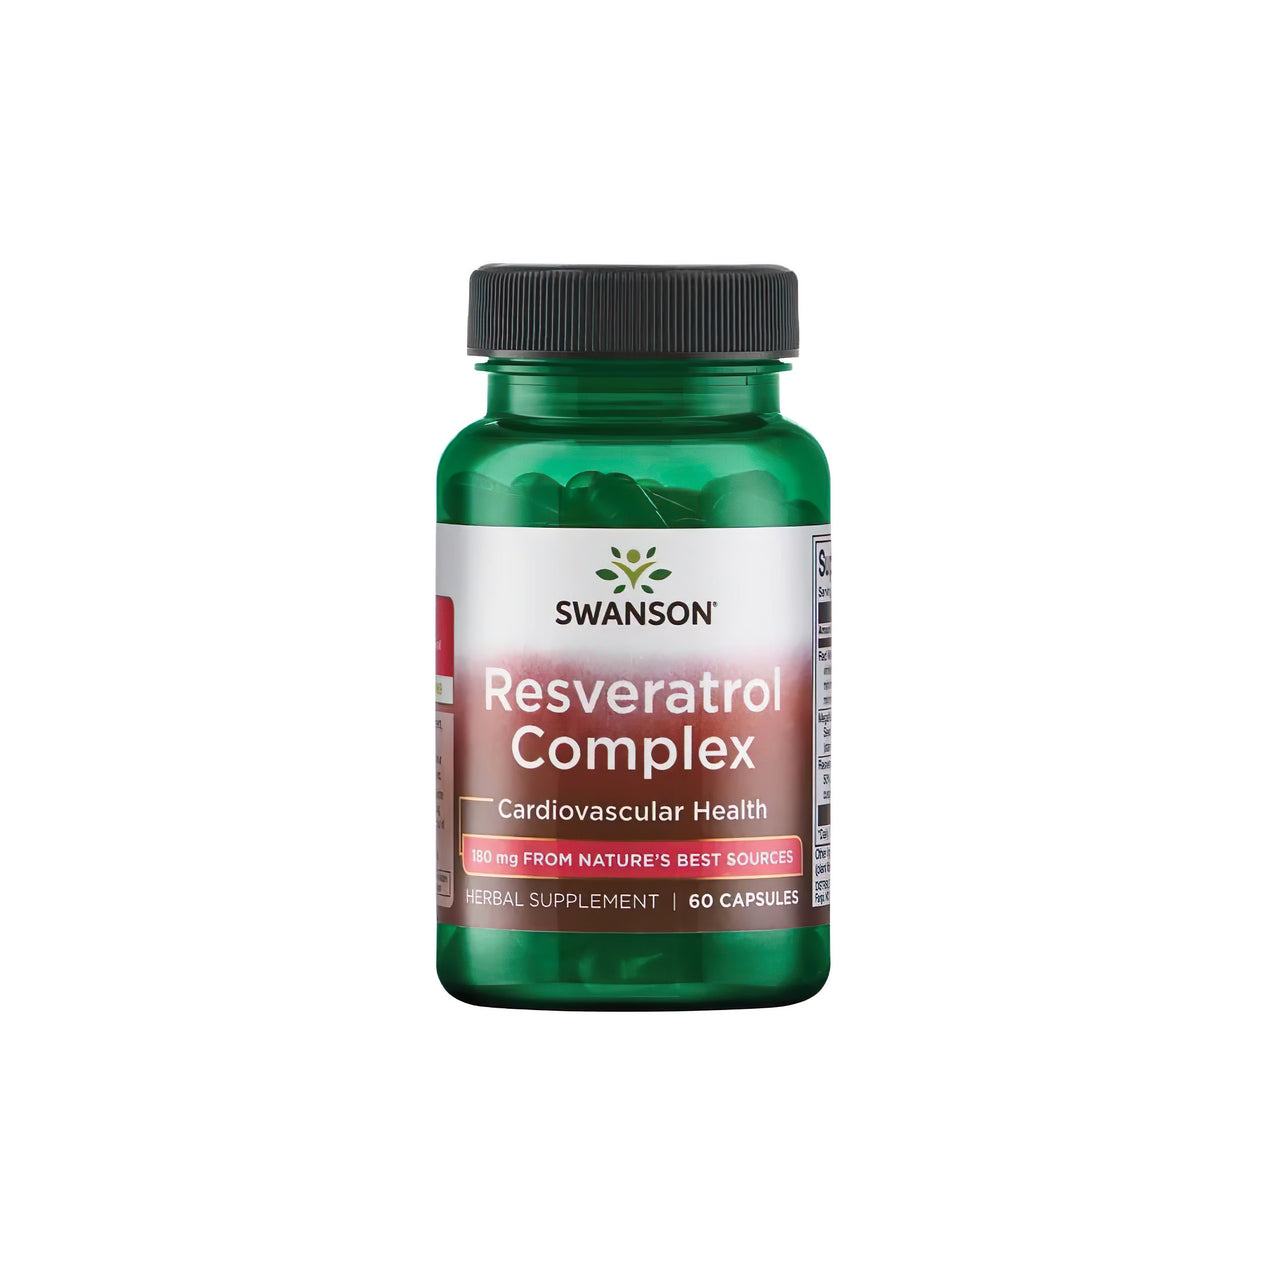 A bottle of Swanson's Resveratrol Complex 60 caps, offering antioxidant protection for the cardiovascular system and promoting cell longevity.